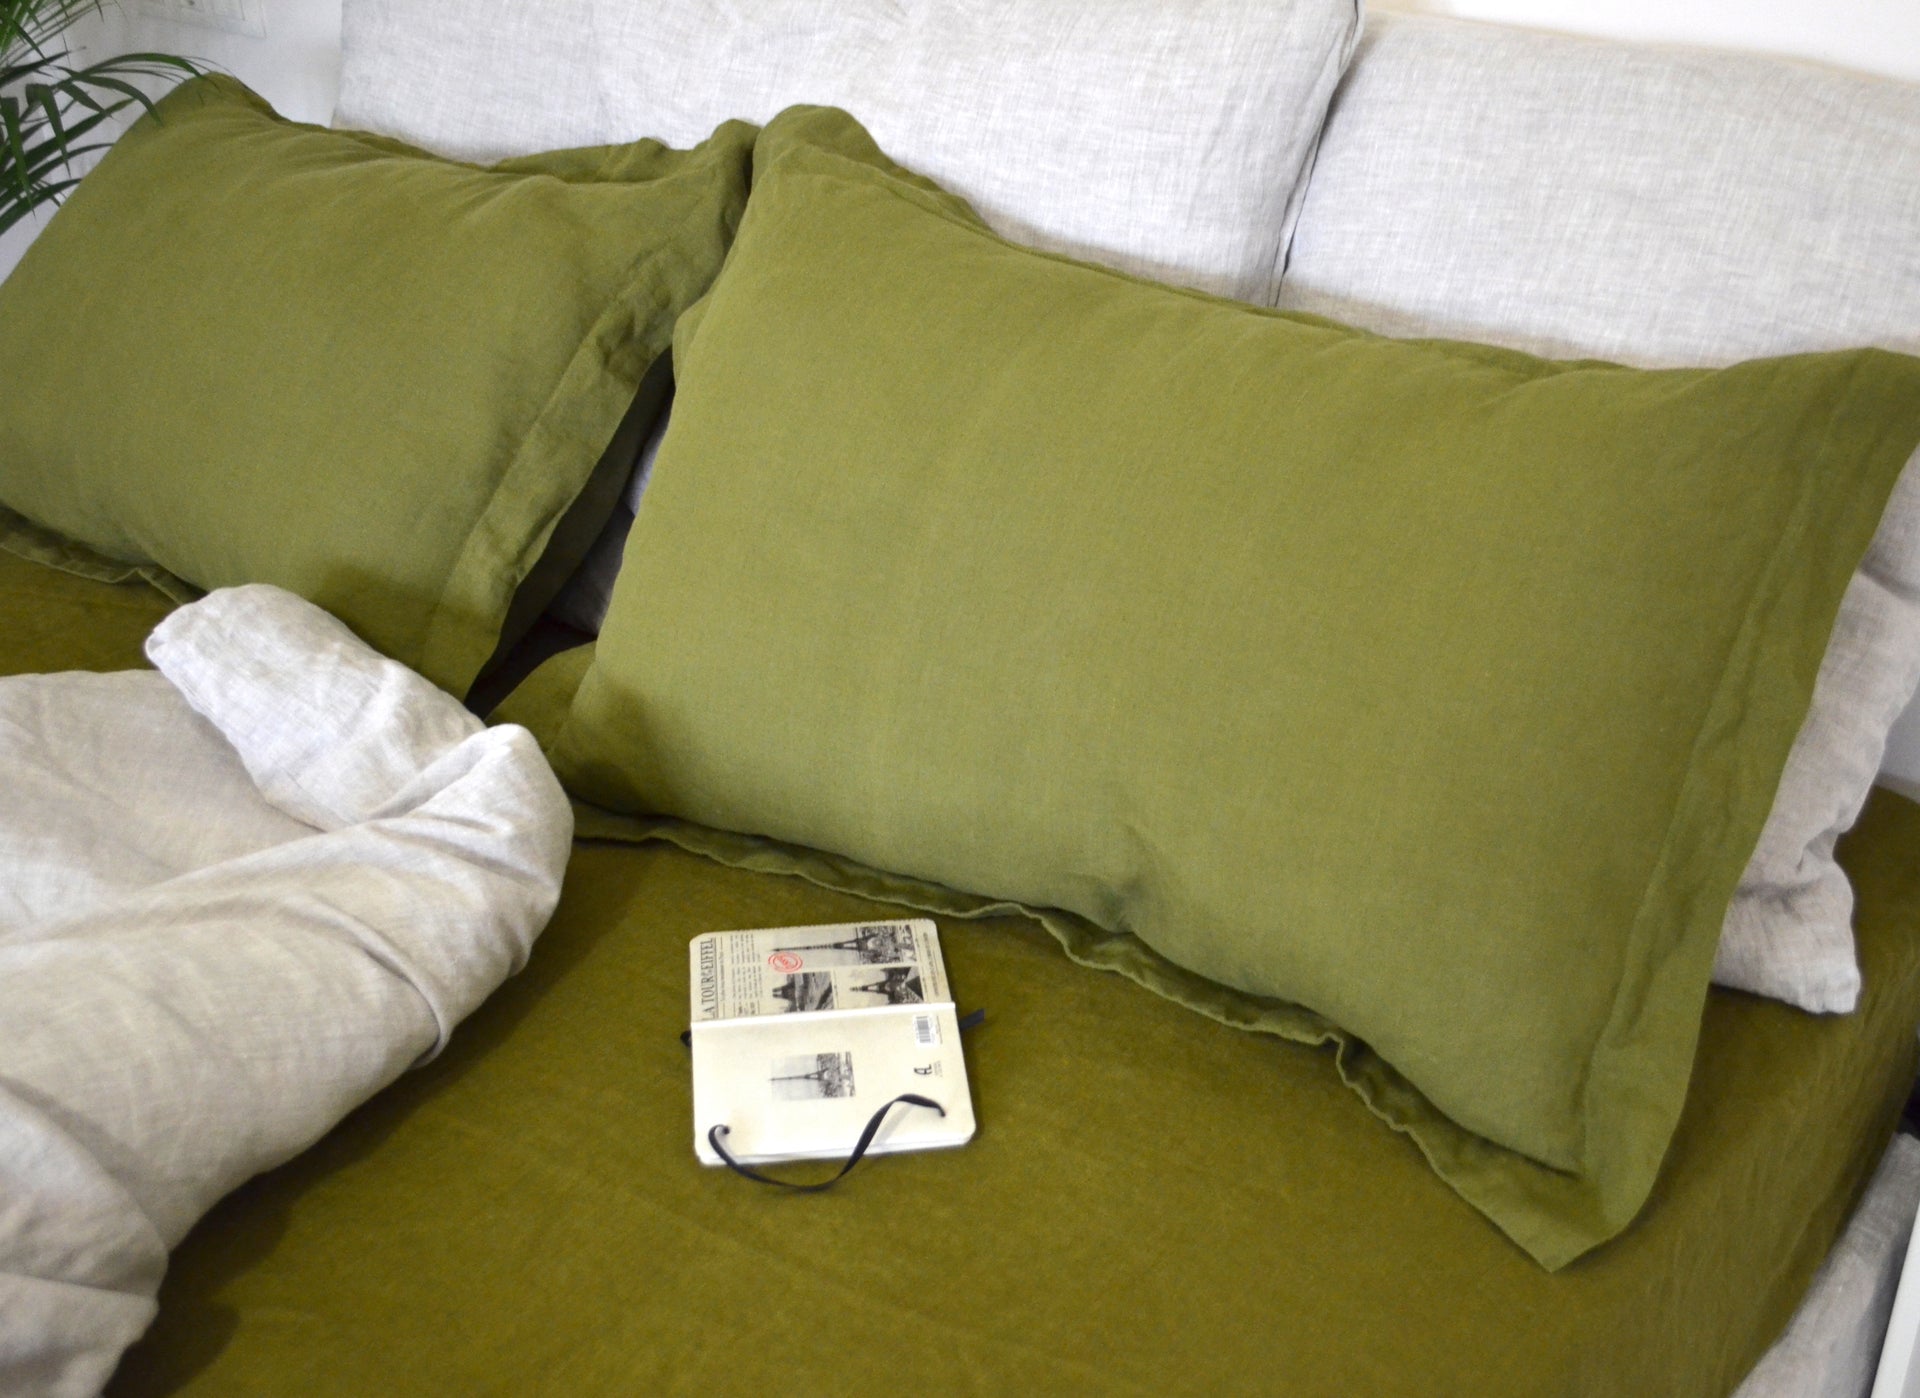 How to Make Flanged Pillow Shams